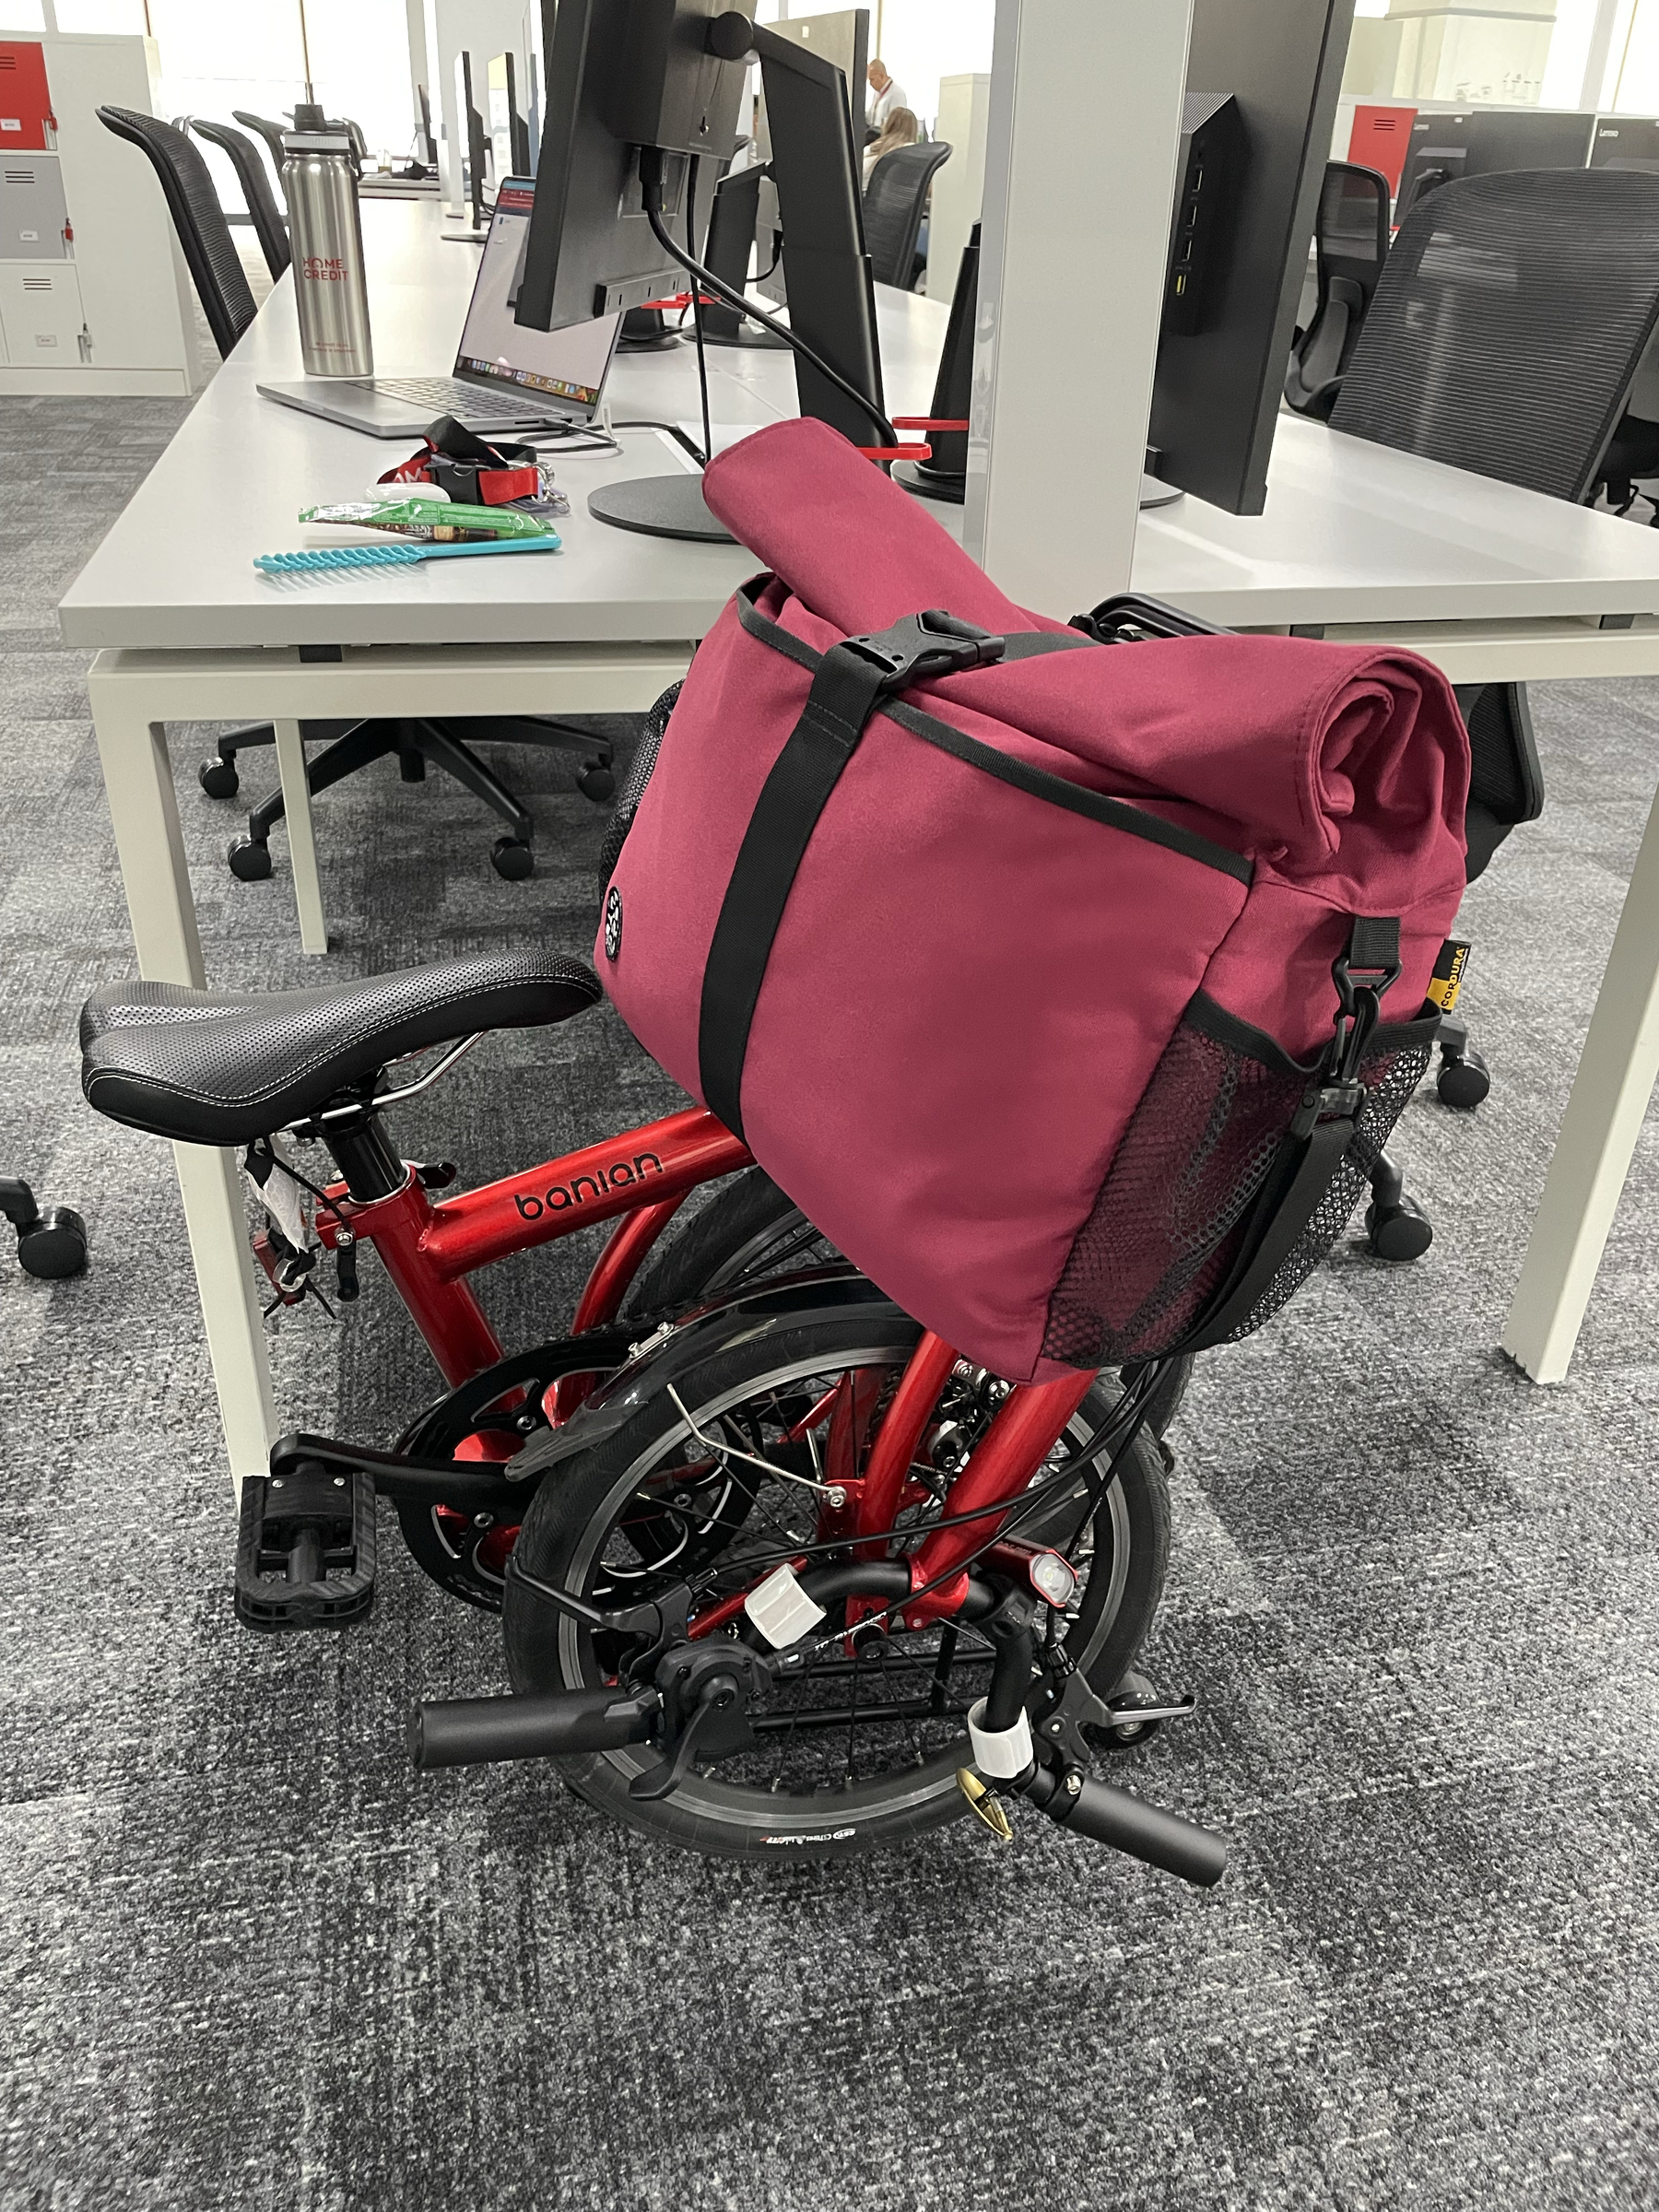 Chi’s trifold bike in the fully folded state positioned next to her table at the office. Her front bag is still attached to the bike.